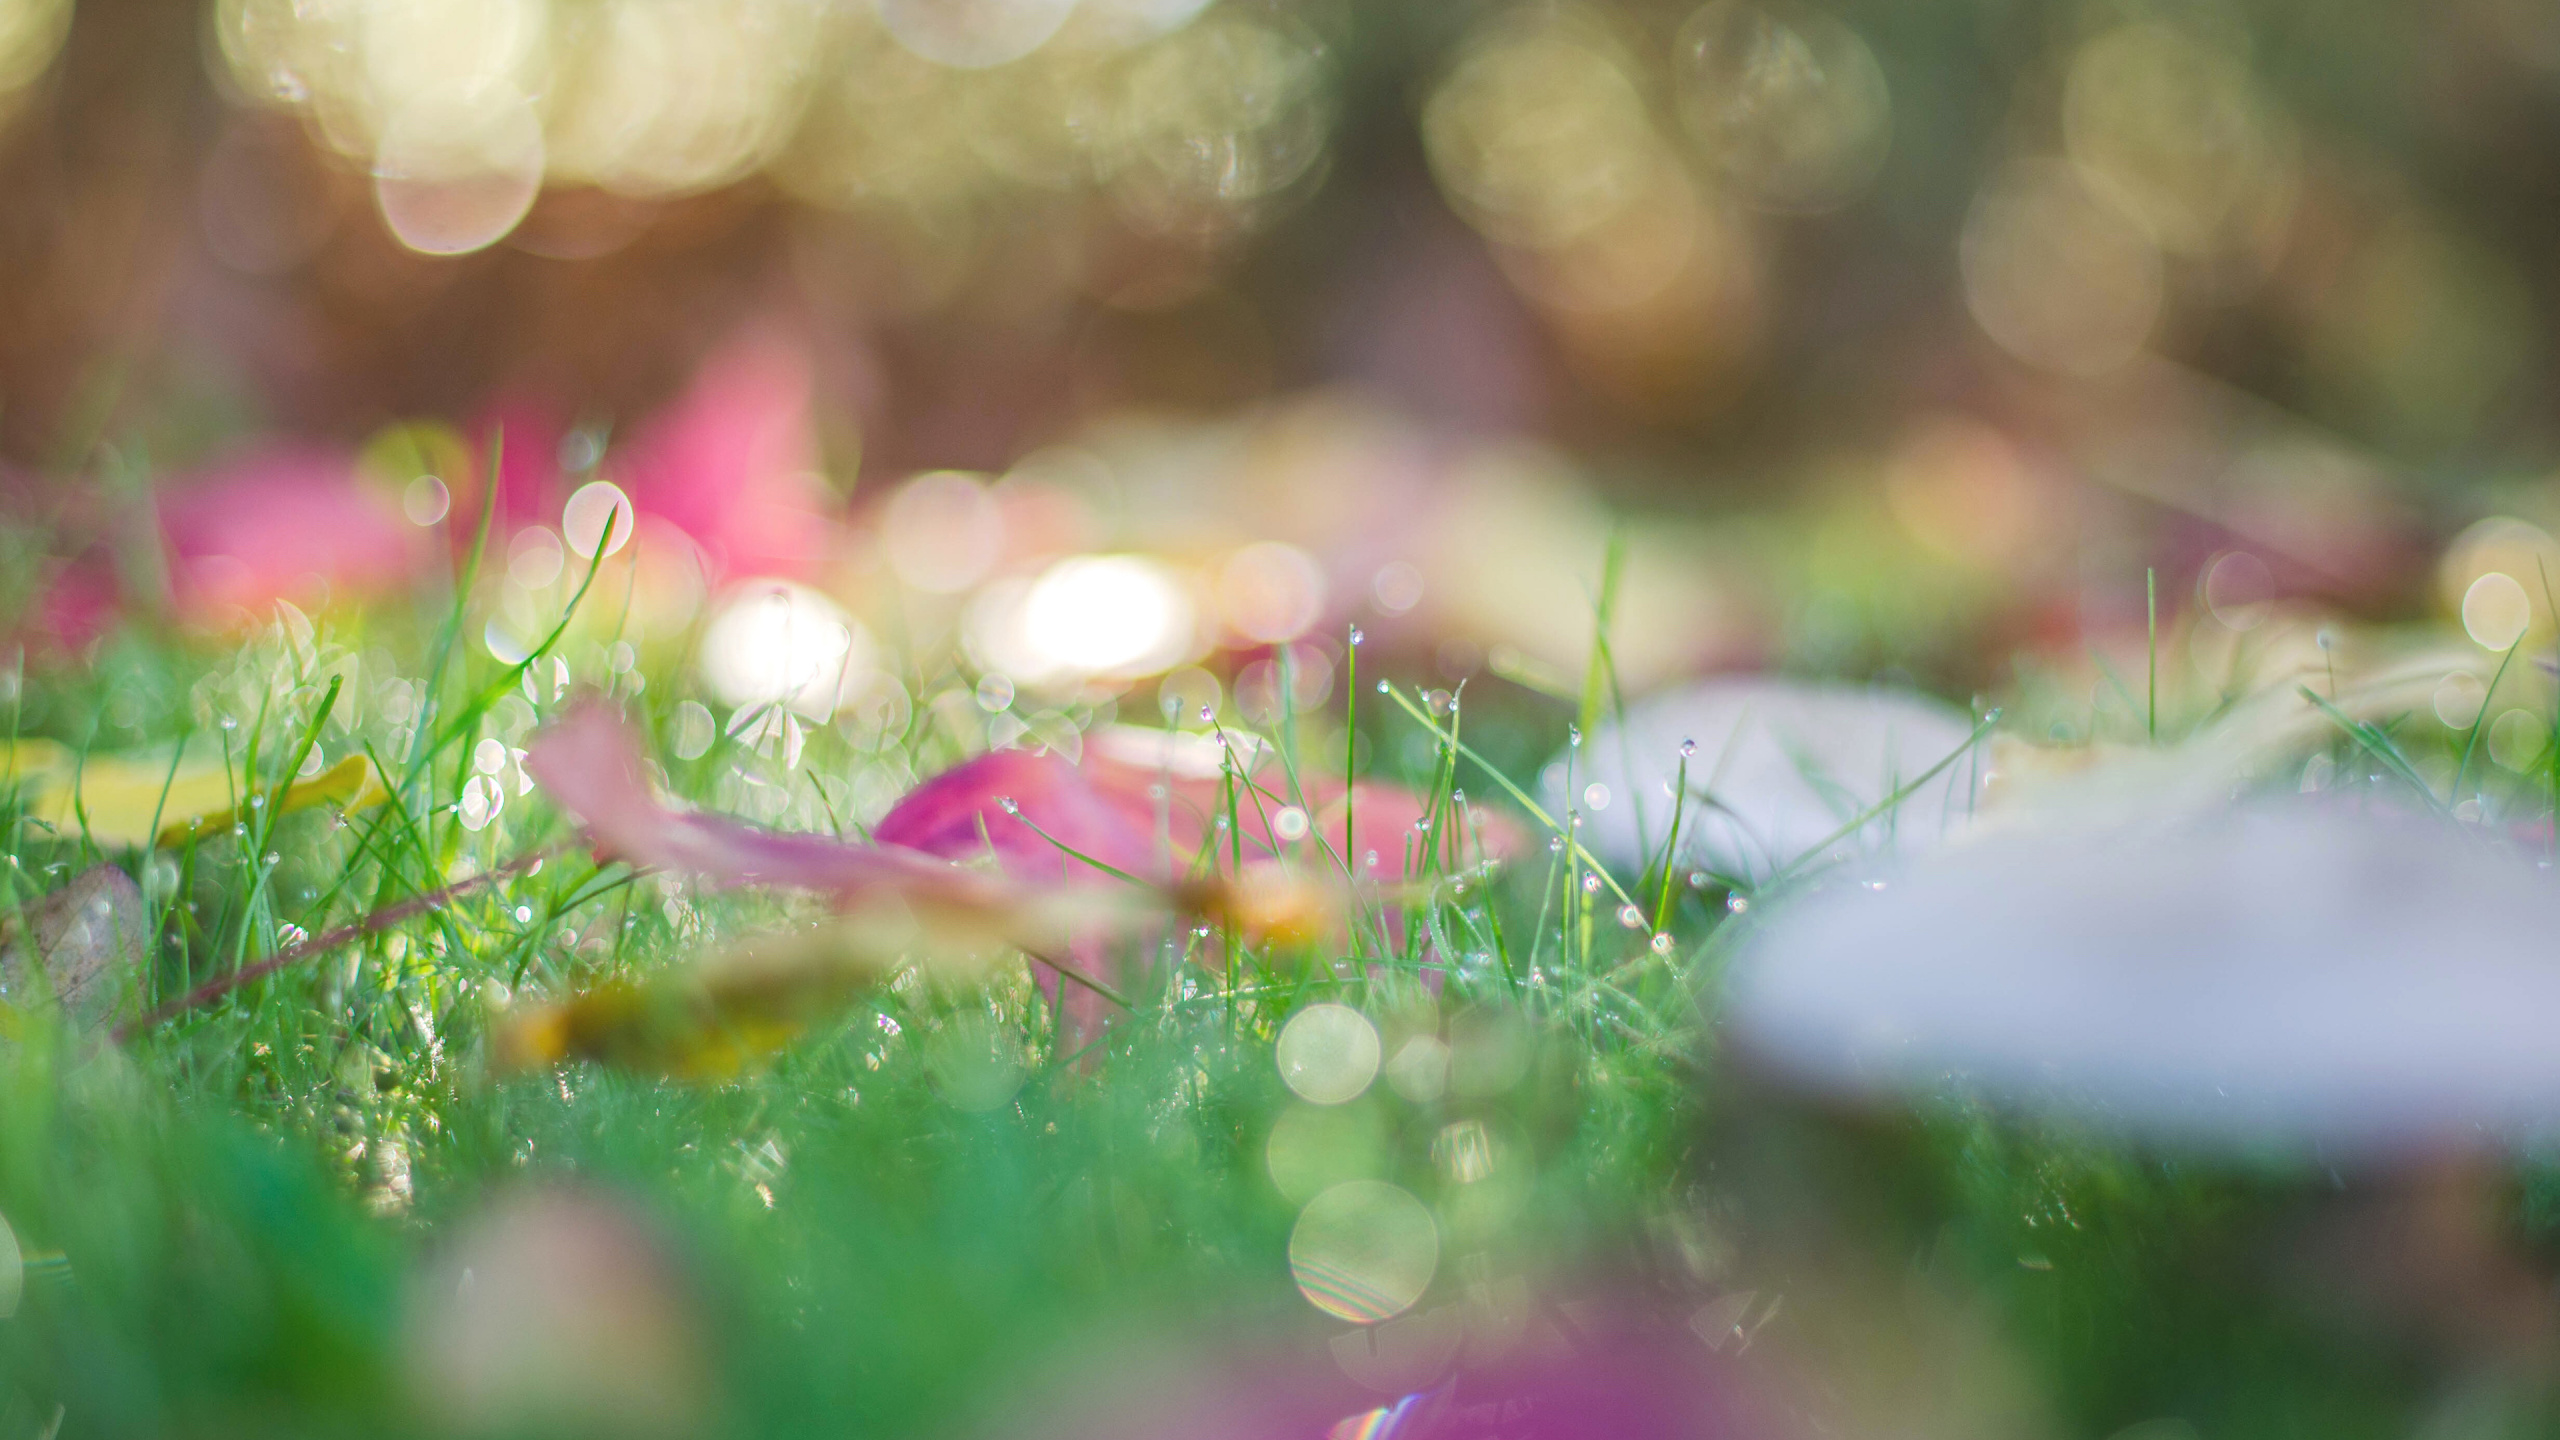 Water Droplets on Green Grass. Wallpaper in 2560x1440 Resolution